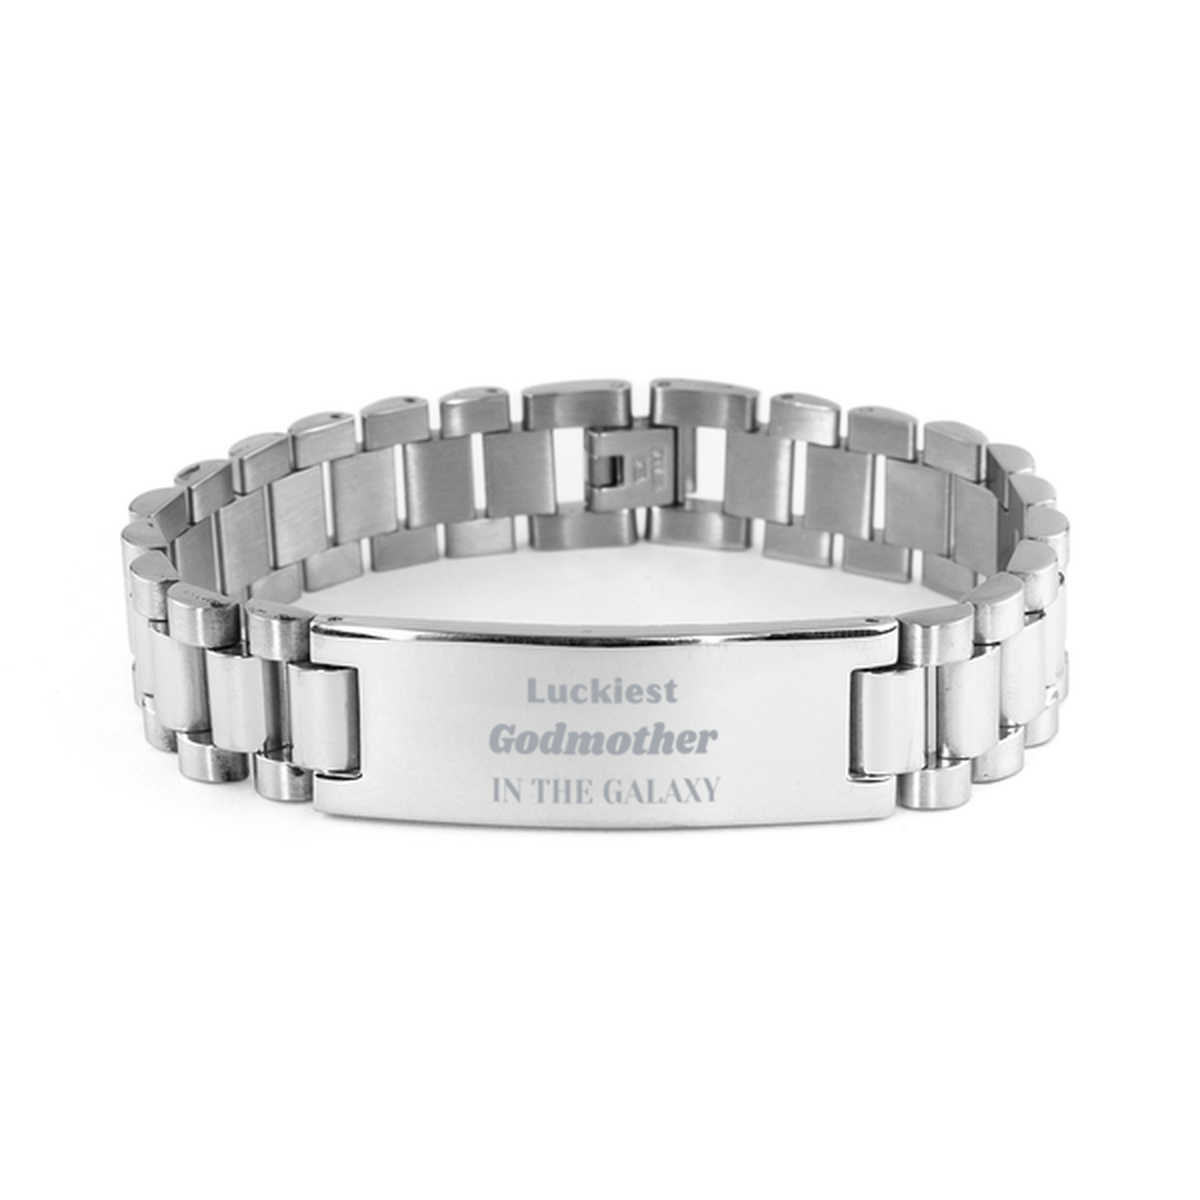 Luckiest Godmother in the Galaxy, To My Godmother Engraved Gifts, Christmas Godmother Ladder Stainless Steel Bracelet Gifts, X-mas Birthday Unique Gifts For Godmother Men Women